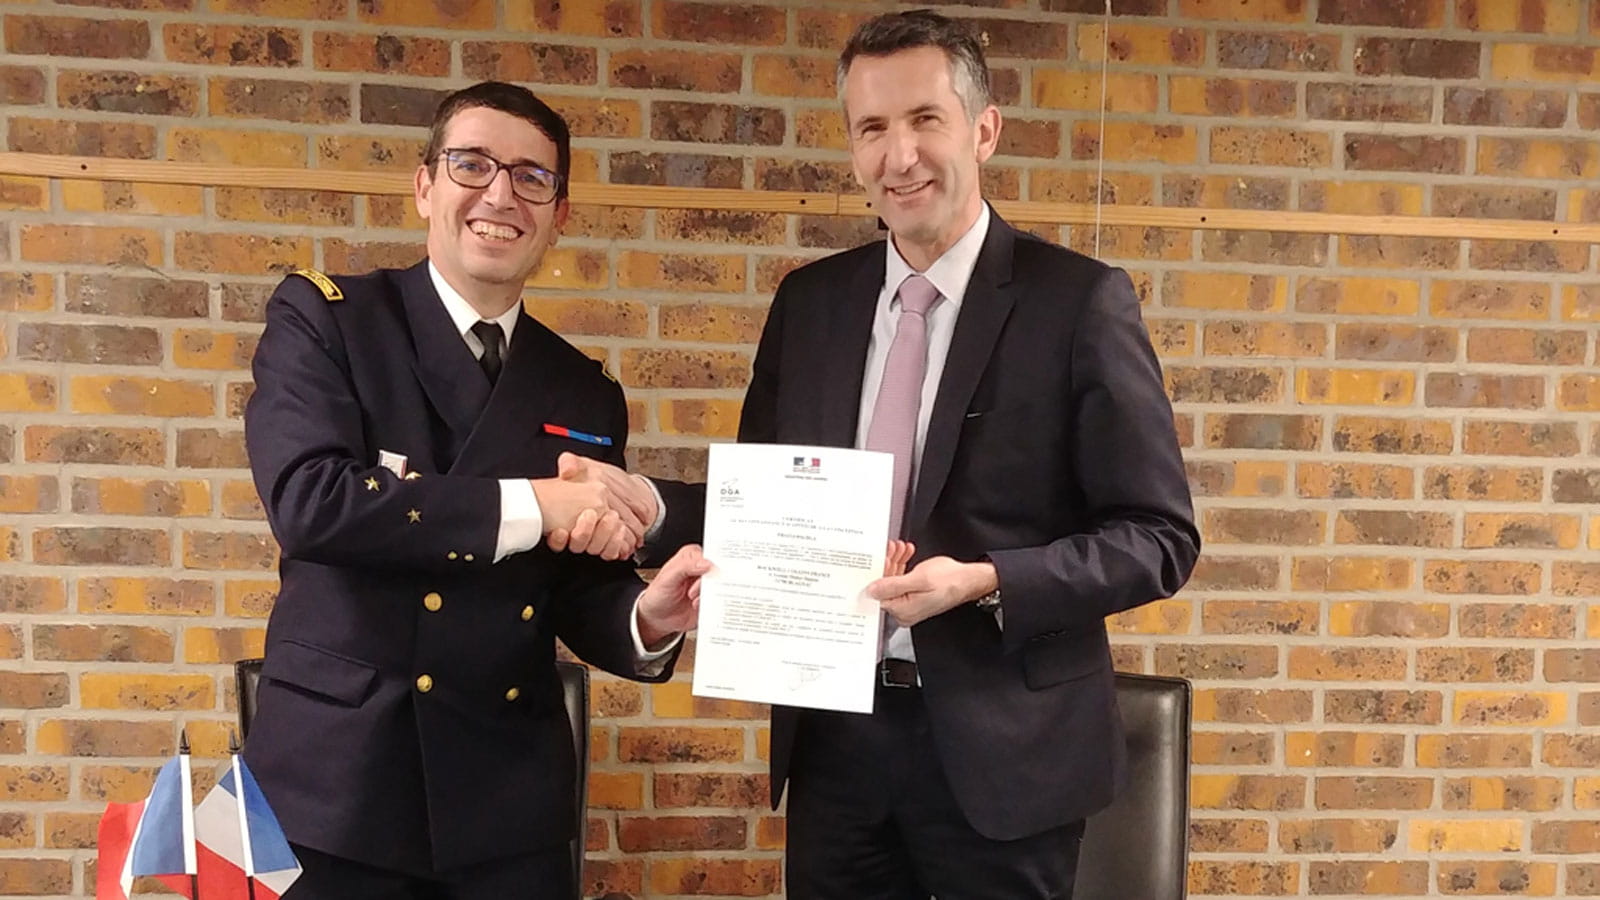 General Patrick Hadou, Ingénieur Général de l'Armement, head of DGA Authority and Olivier Pedron, managing director of Collins Aerospace Avionics in France, at the certification signing ceremony on Thursday, Jan. 24.